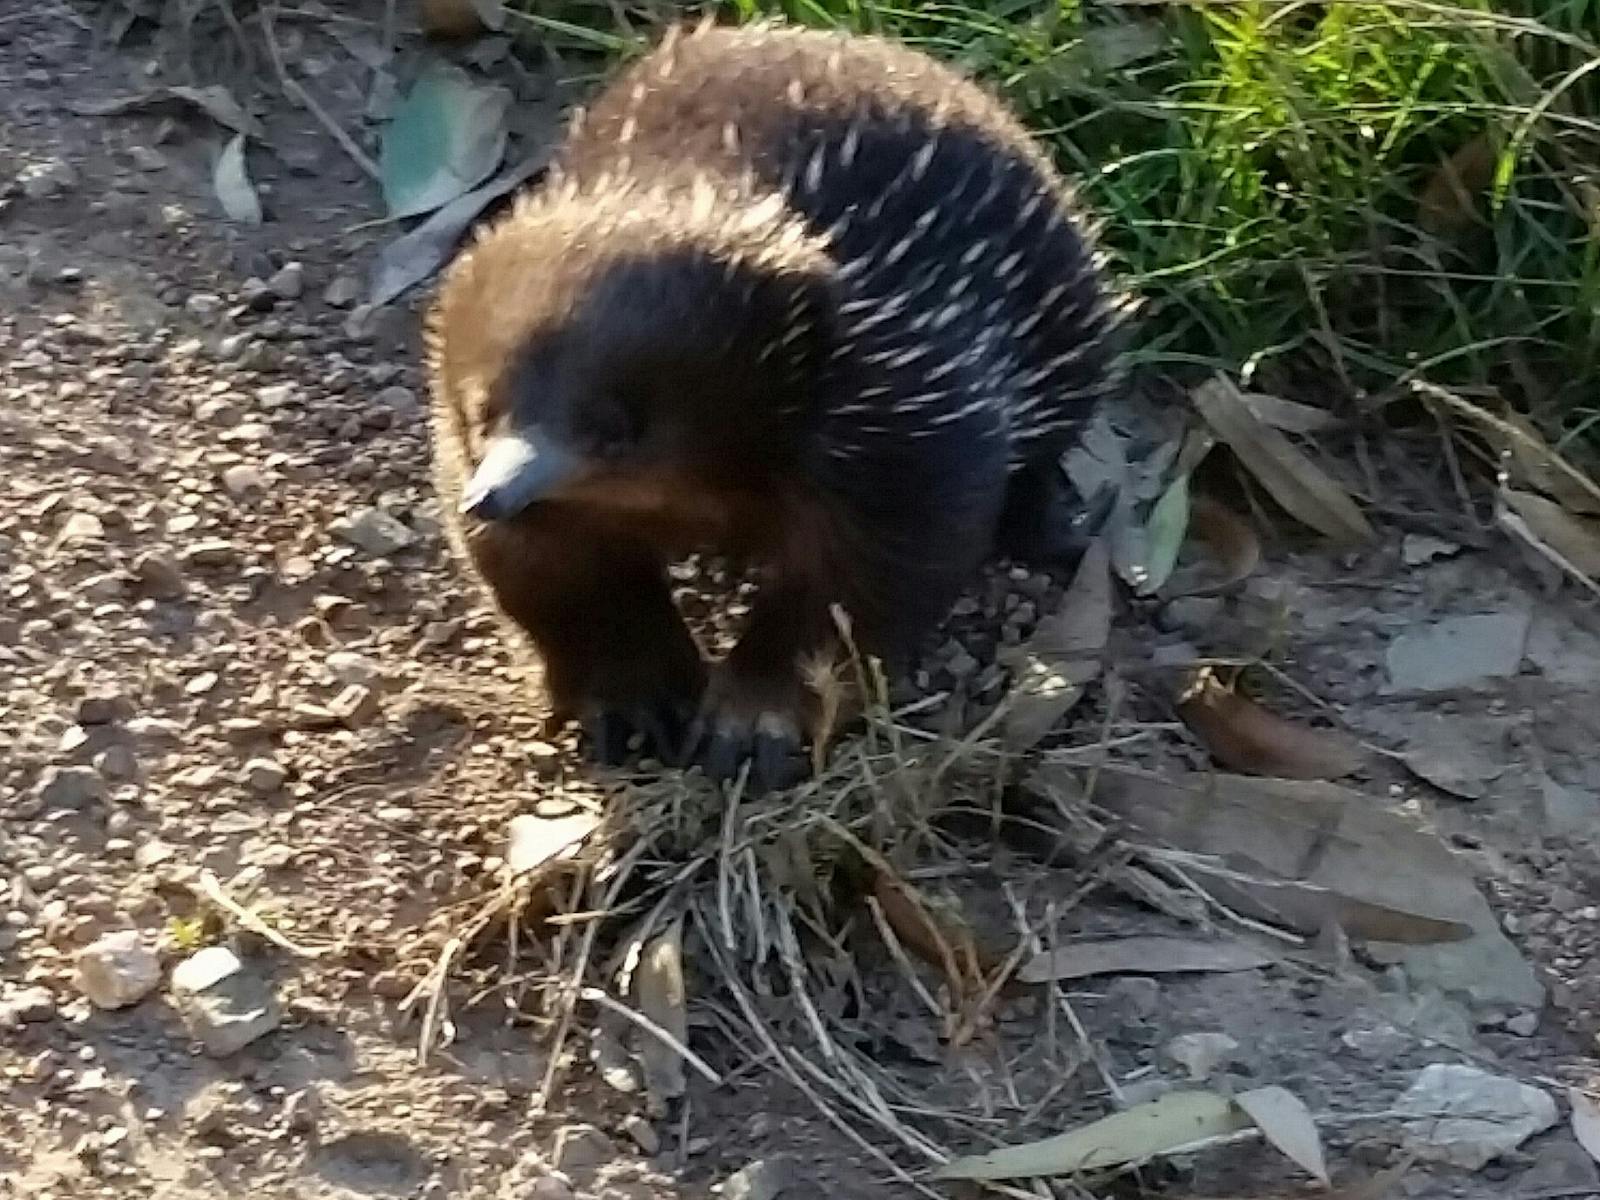 An echidna catching the sunlight in its quills